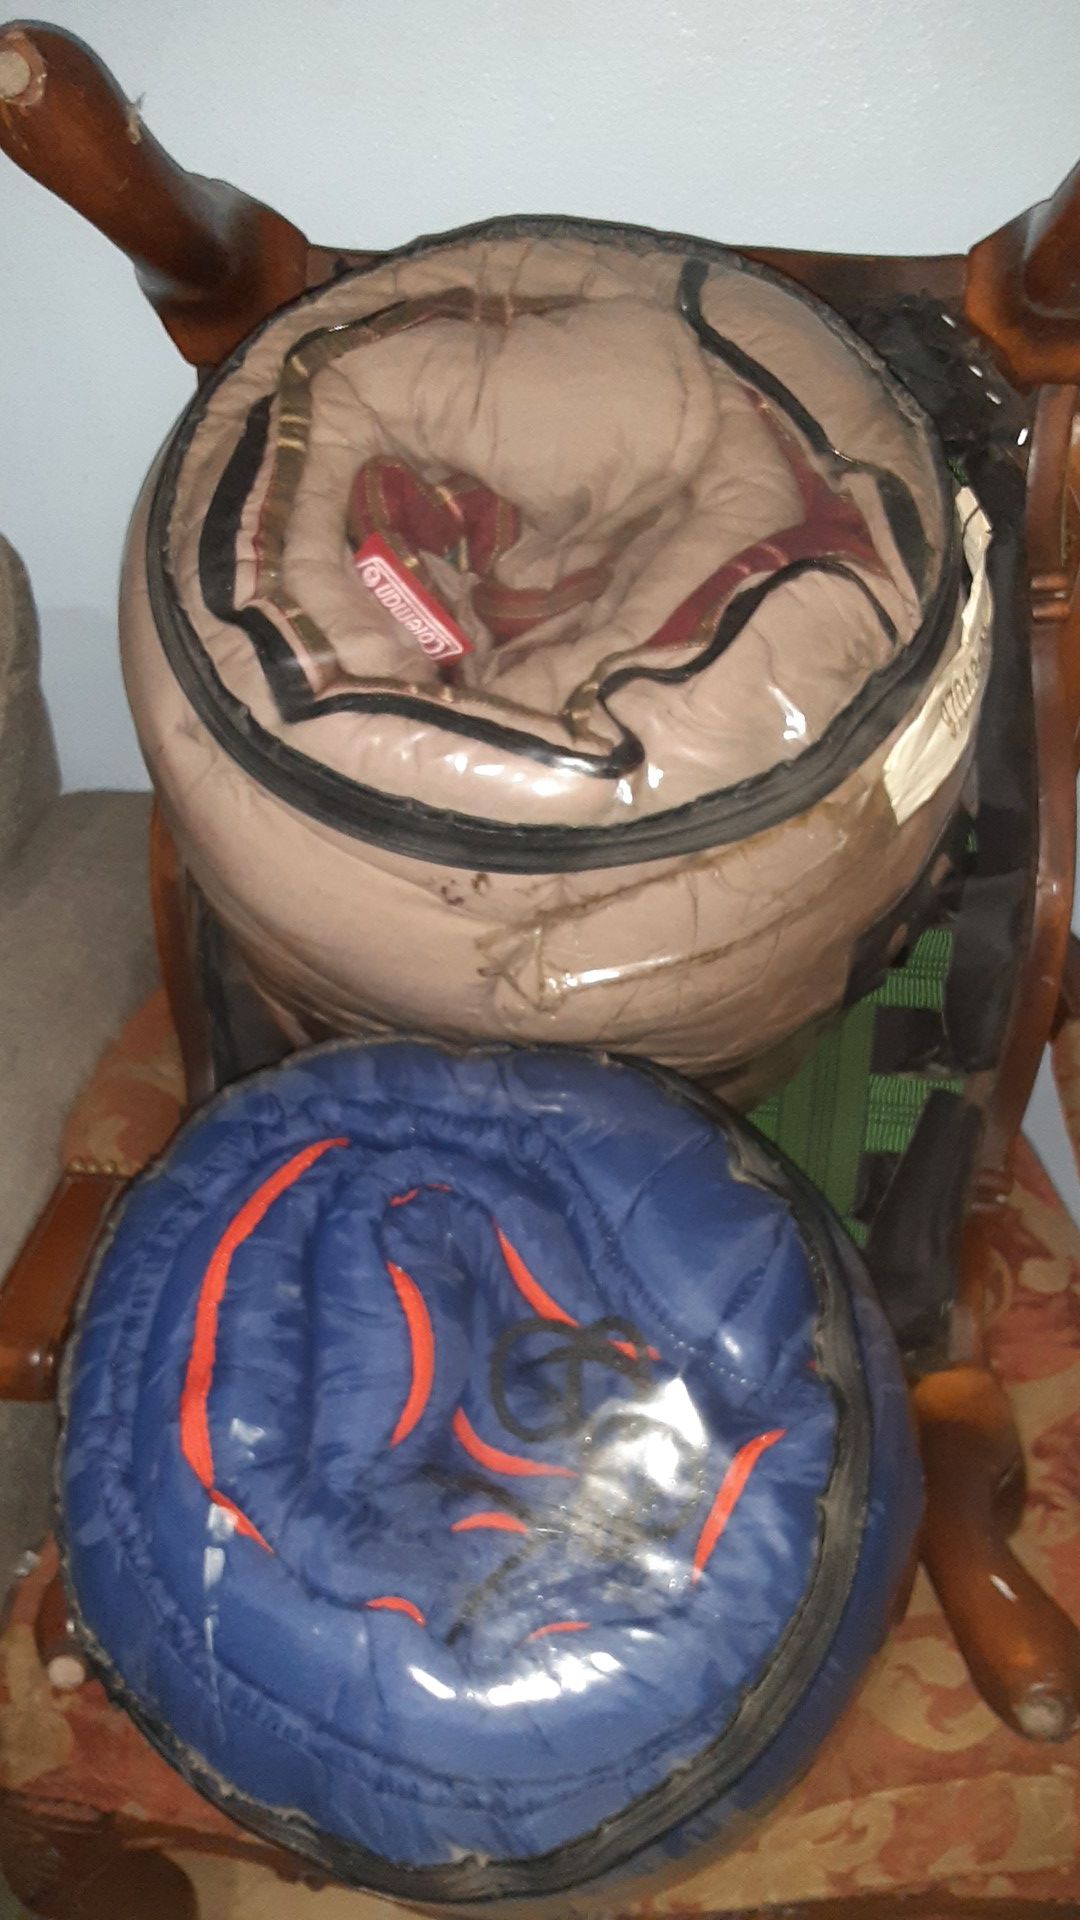 Sleeping bags (2 for $50) never used